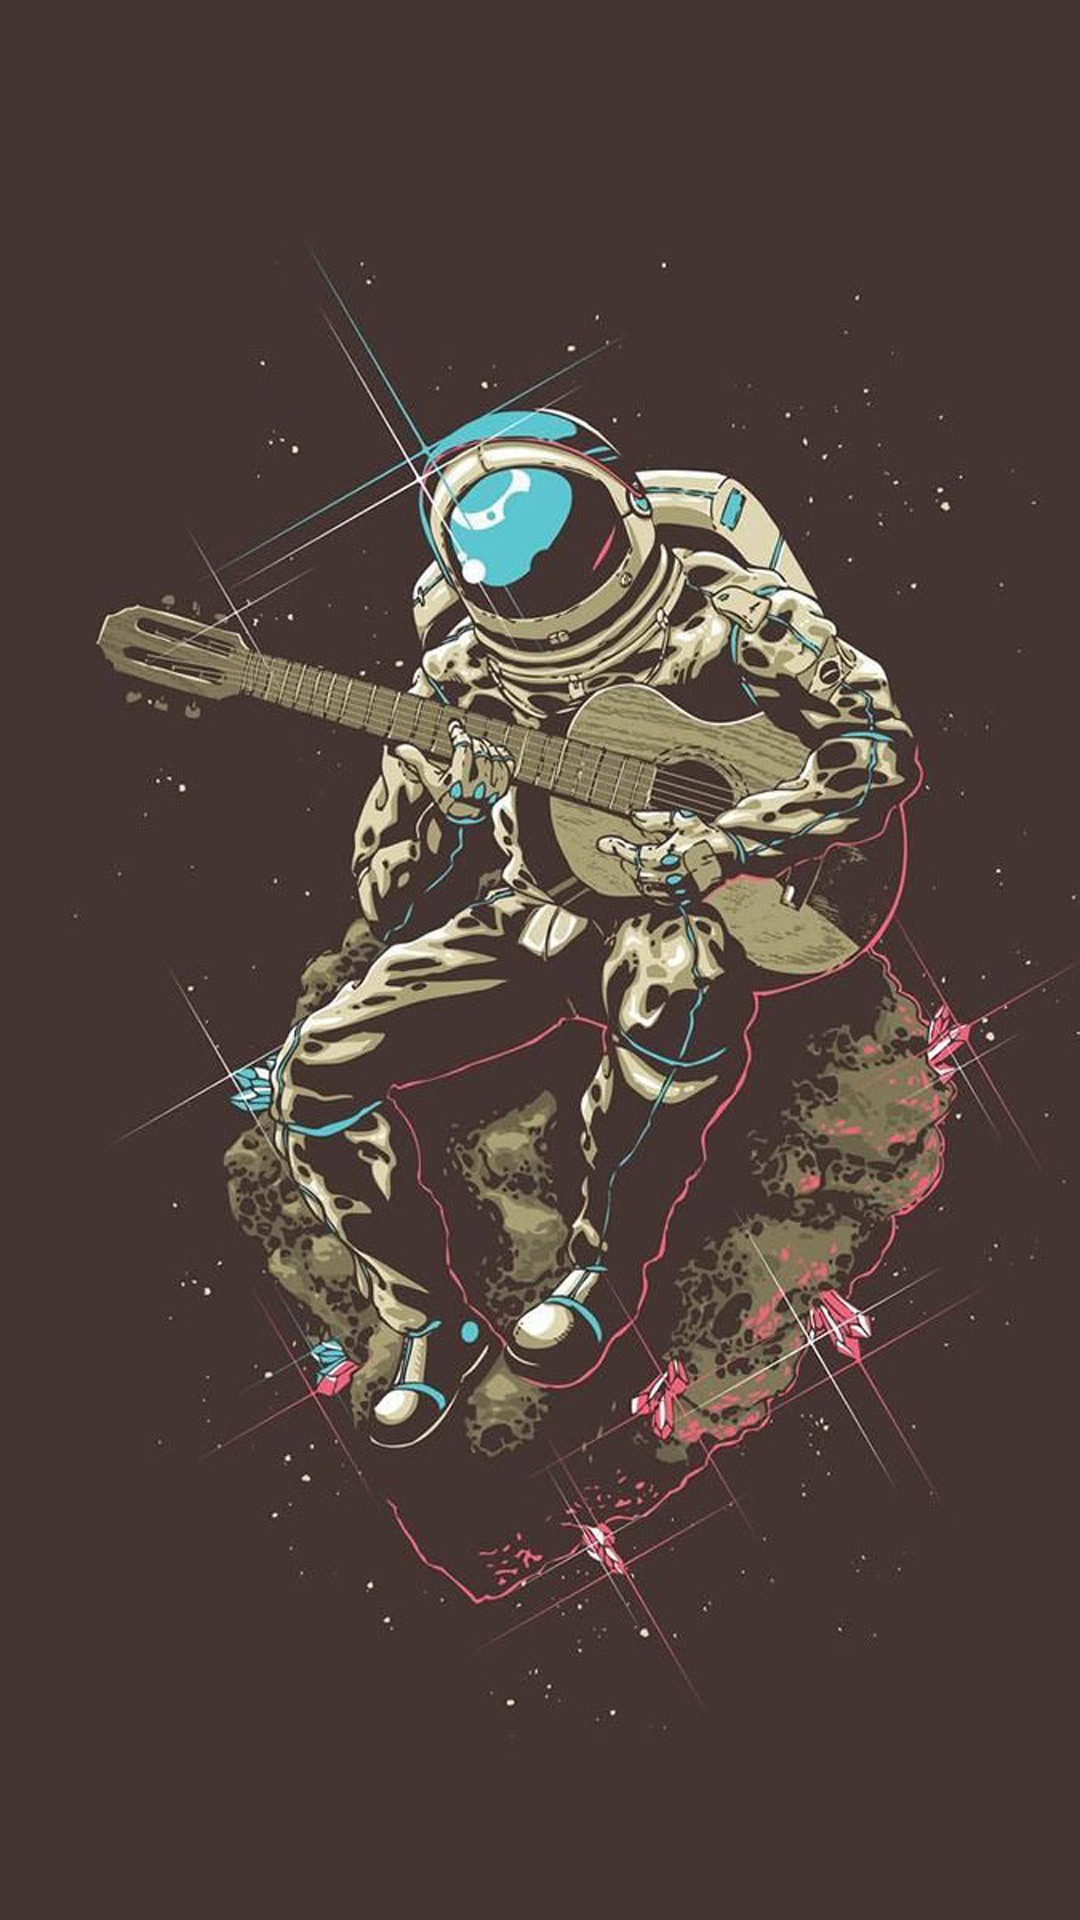 Astronaut With Guitar In Space Iphone Background - Astronaut Wallpaper Iphone Hd - HD Wallpaper 